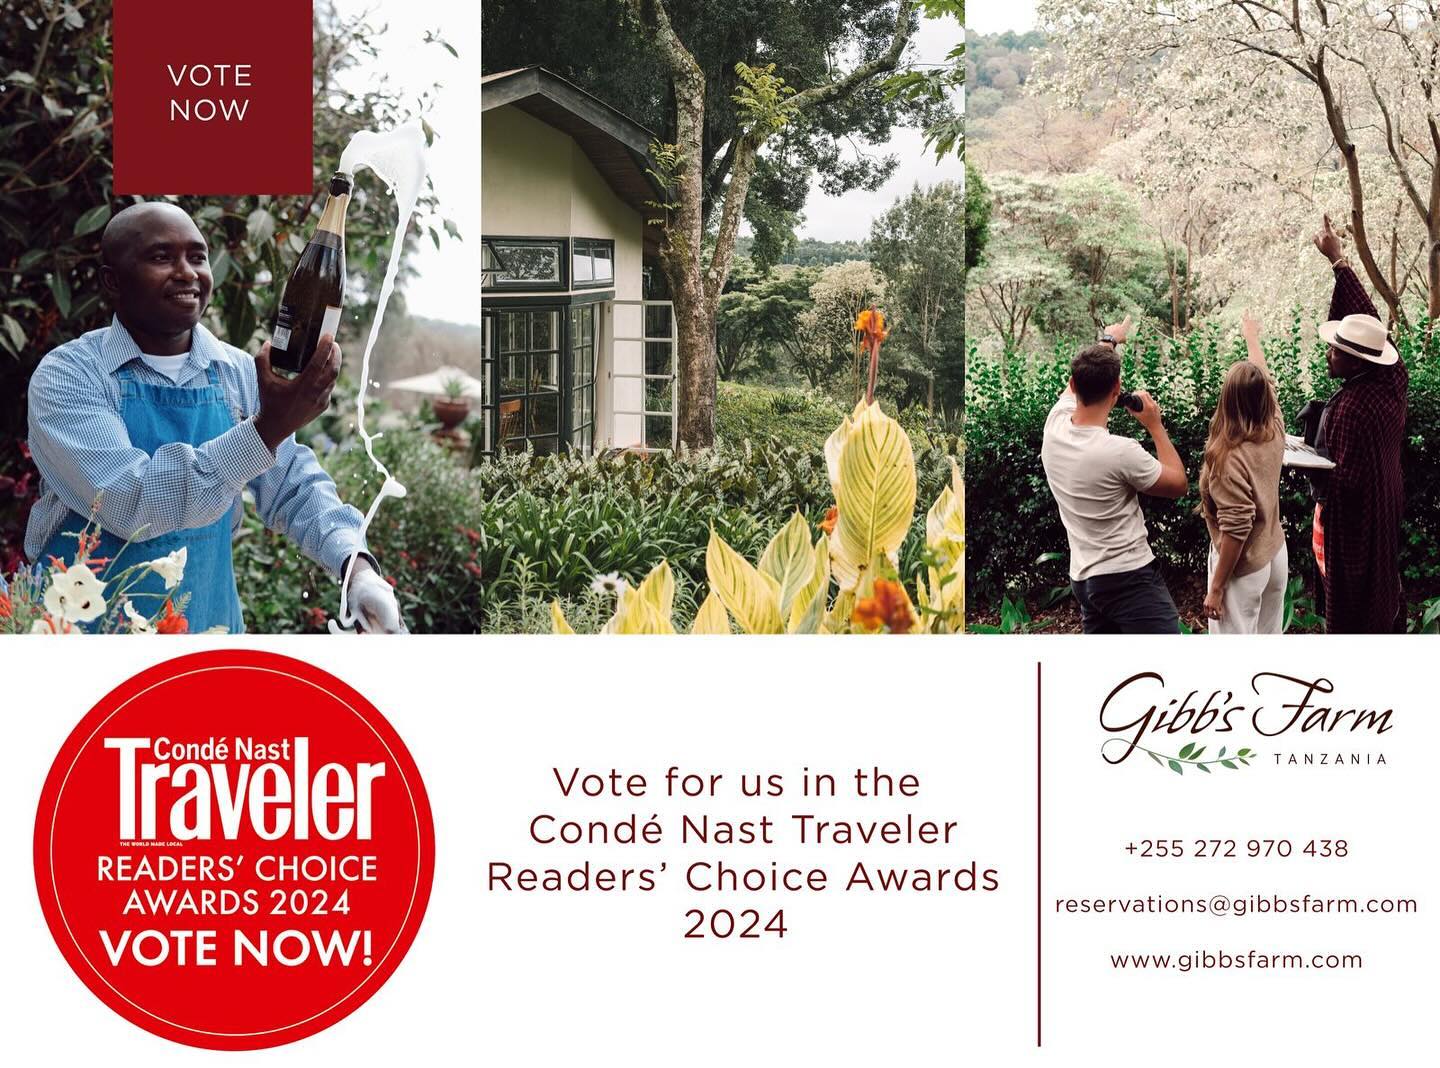 We are honoured to be nominated in the Condé Nast Readers Choice Awards. If you have enjoyed a visit or stay with us please vote for us https://condenast-interactive.typeform.com/to/EYtfprHM?typeform-source=www.cntraveler.com